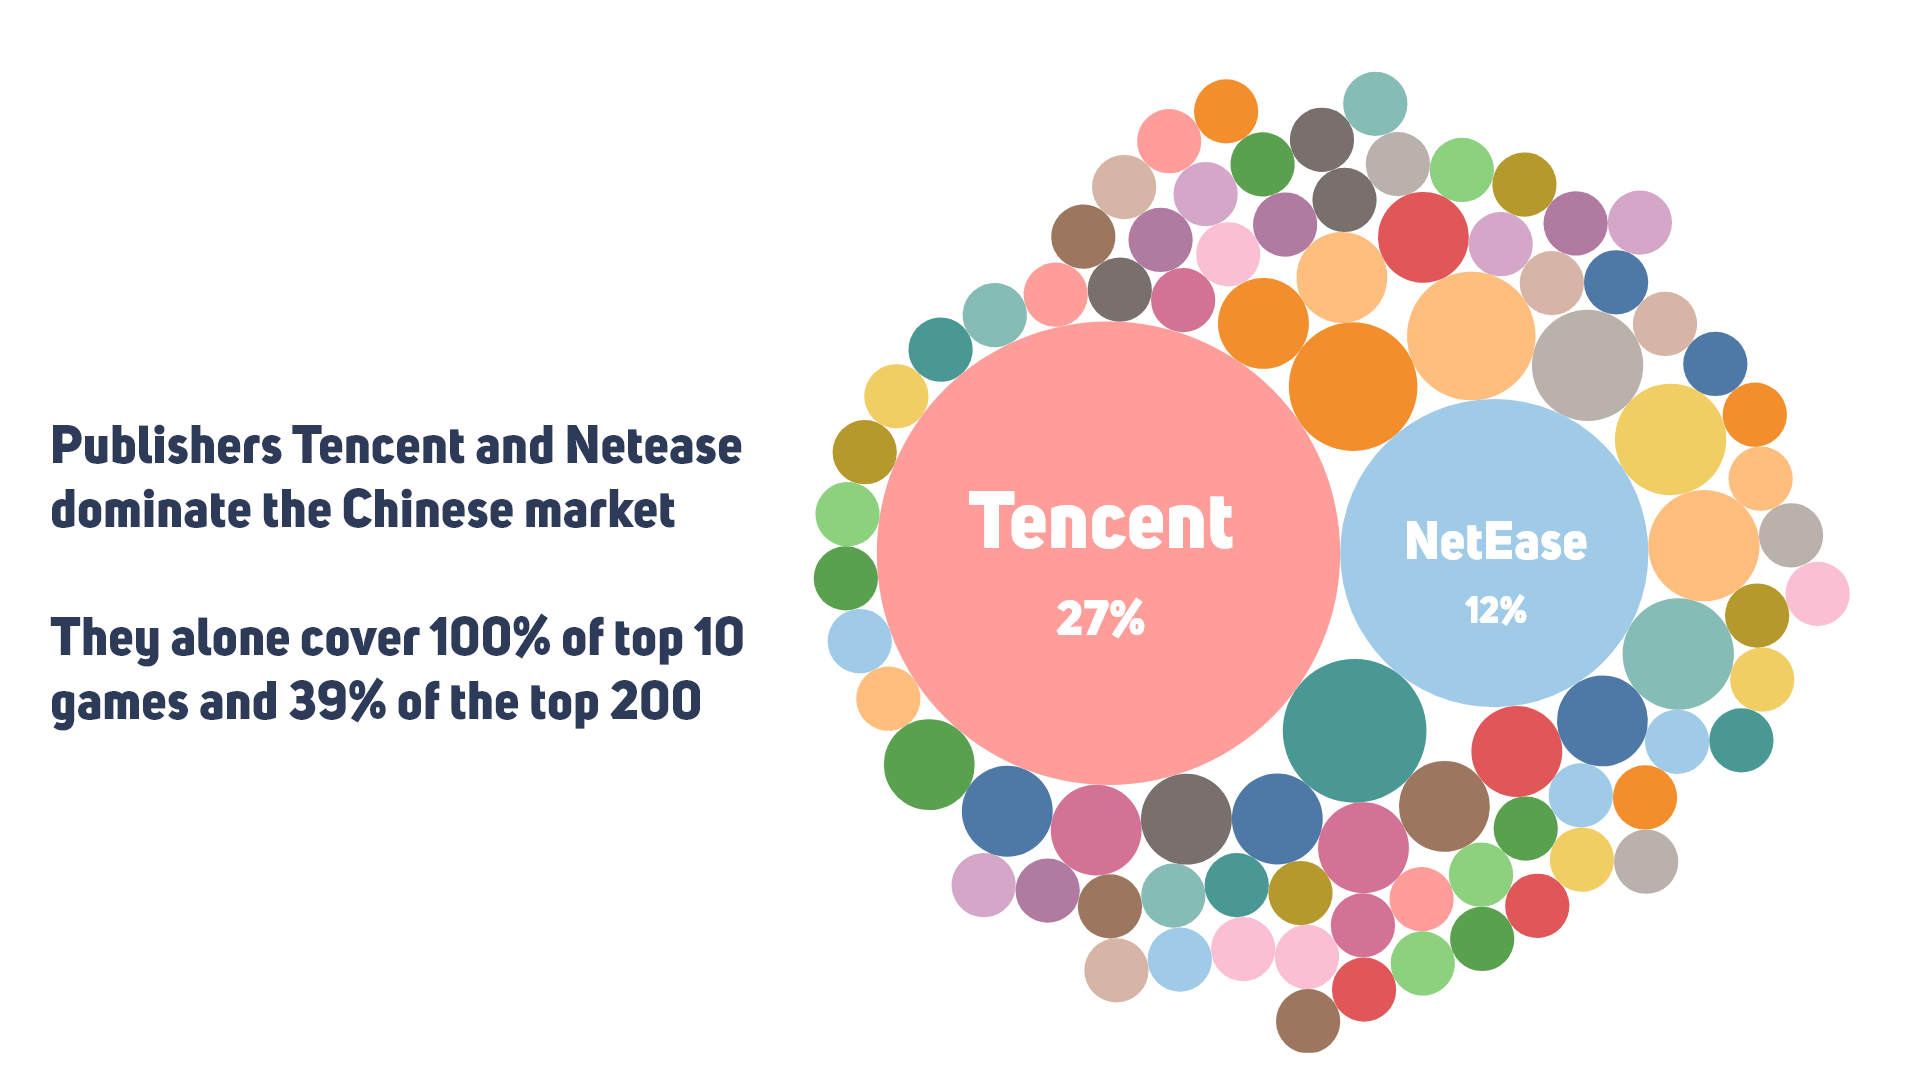 Tencent and NeEase Dominant Market Share in Chinese mobile games market